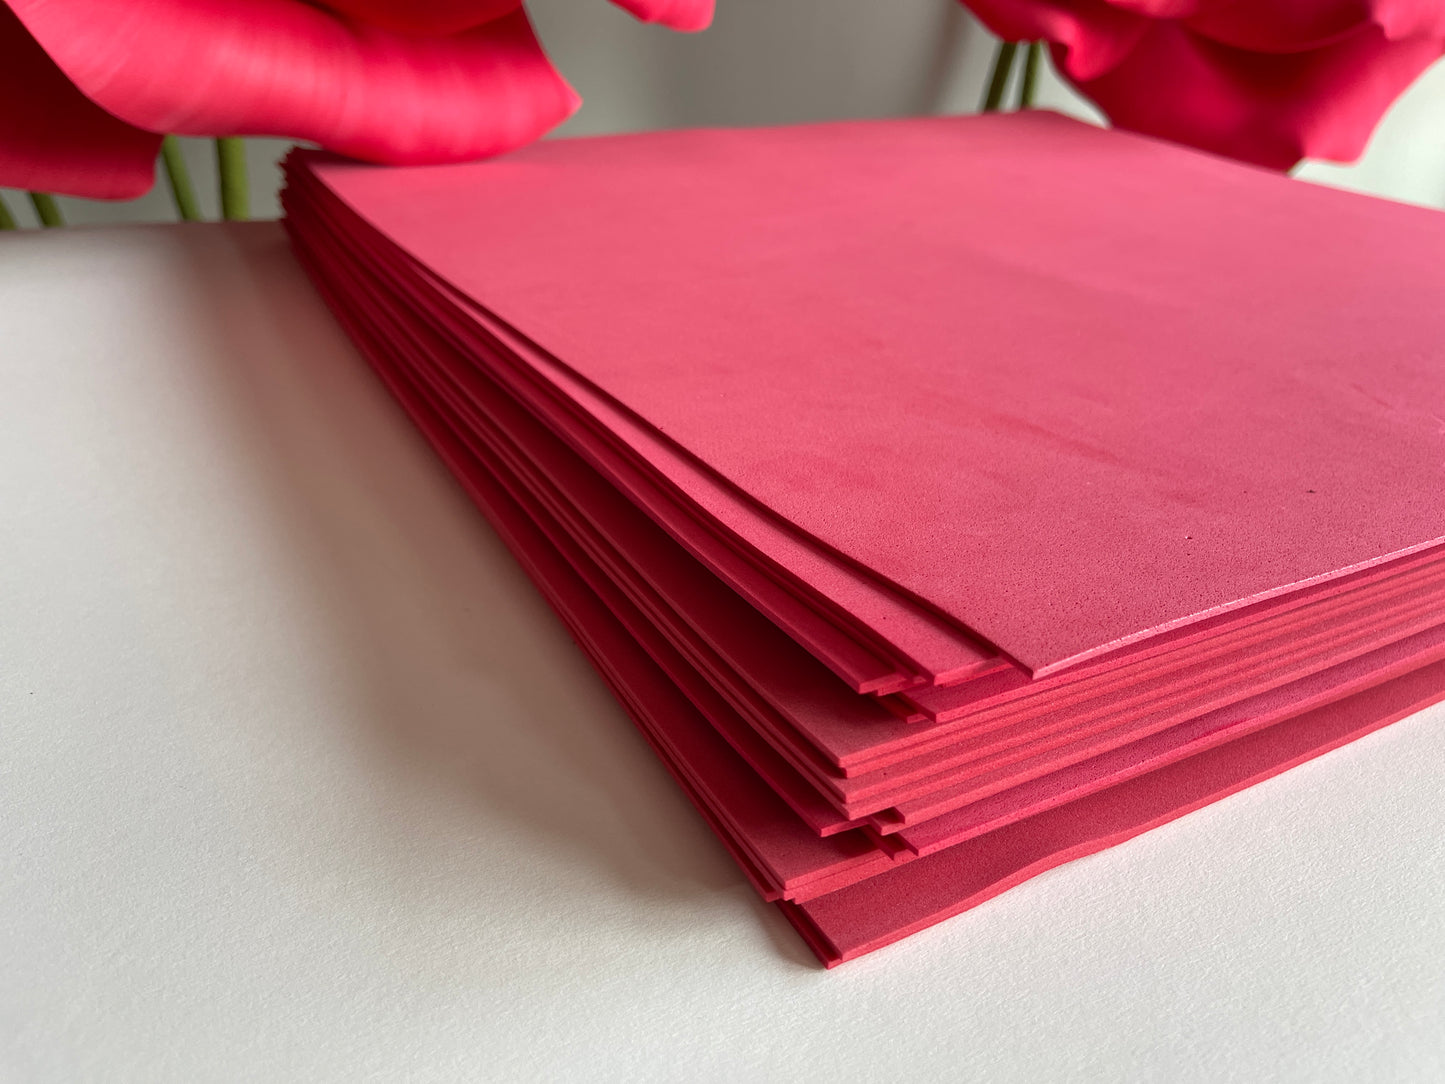 Pre Order for Soft Eva Foam 2 mm thickness Sheets 50x50 cm for Giant Flowers Making